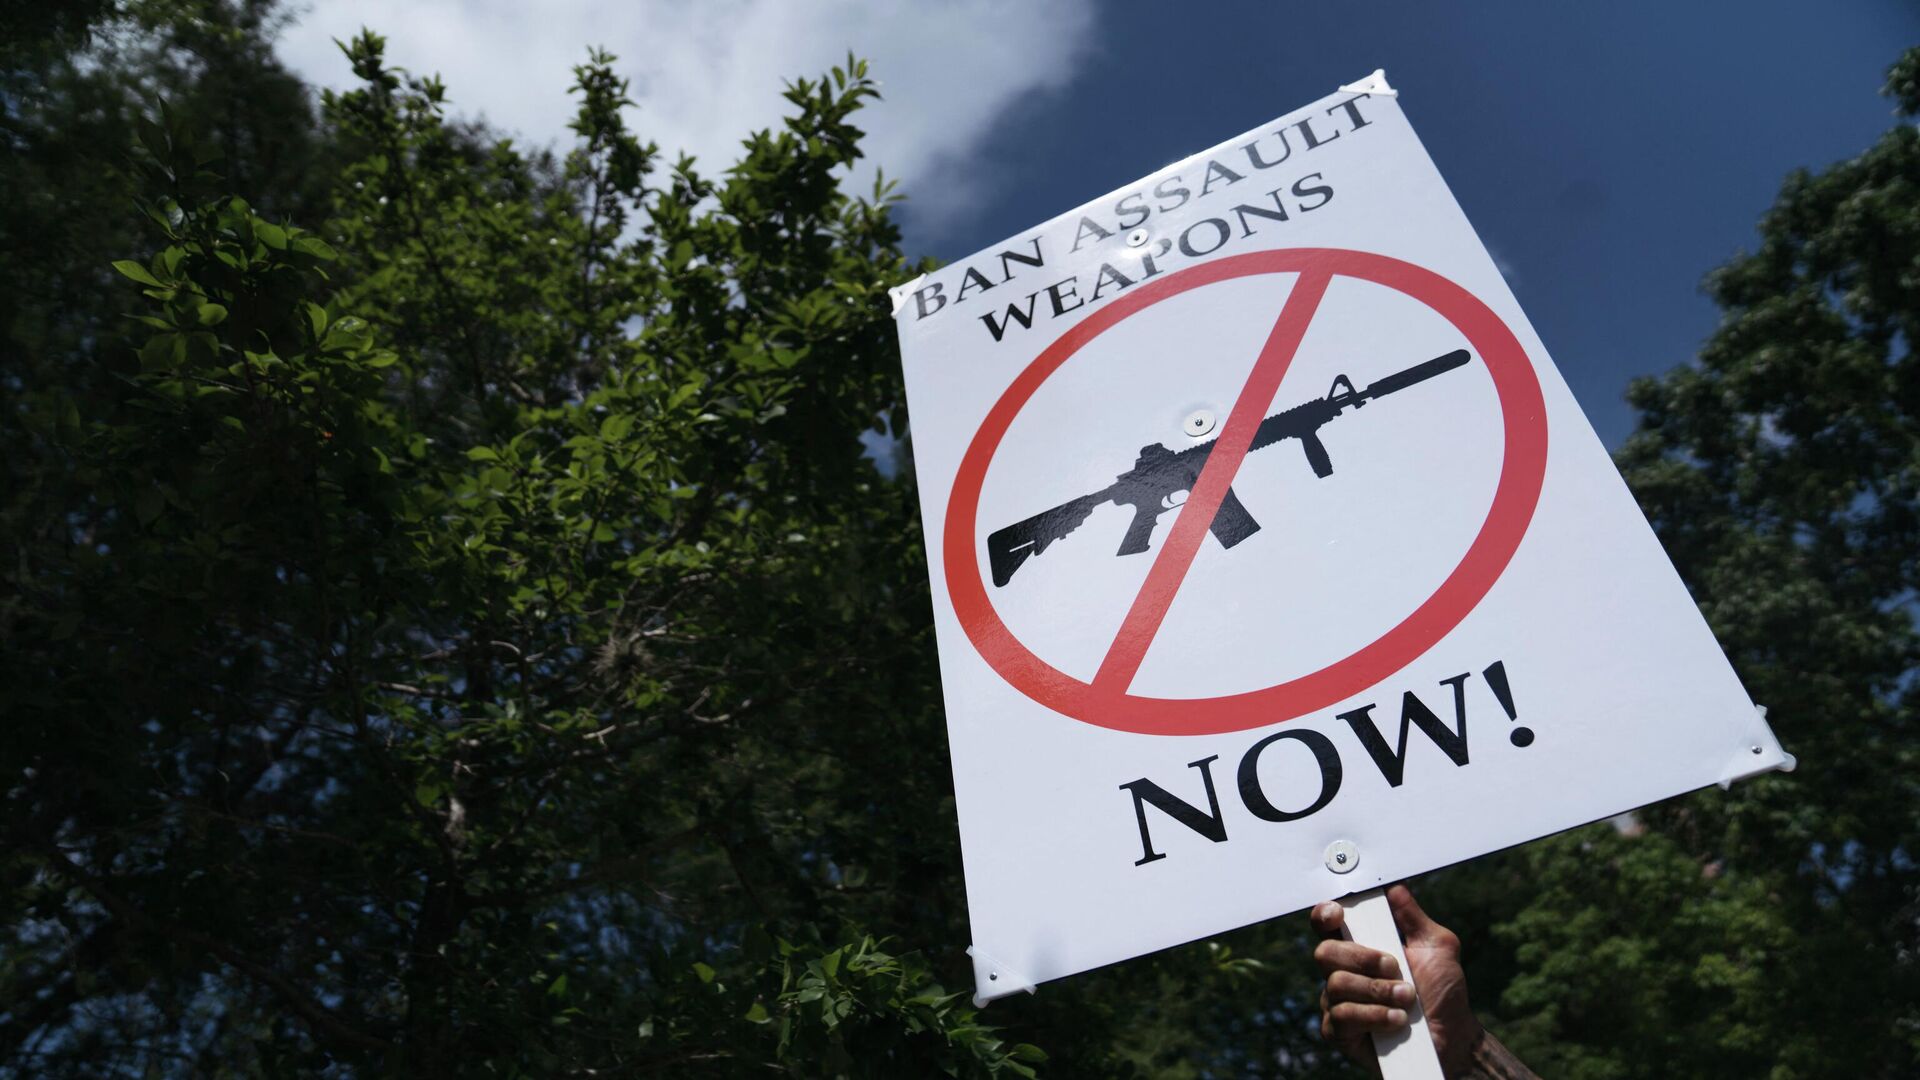 HOUSTON, TX - MAY 27: A gun control advocate holds a sign during a protest across from the National Rifle Association Annual Meeting at the George R. Brown Convention Center, on May 27, 2022 in Houston, Texas.  - Sputnik International, 1920, 22.06.2022